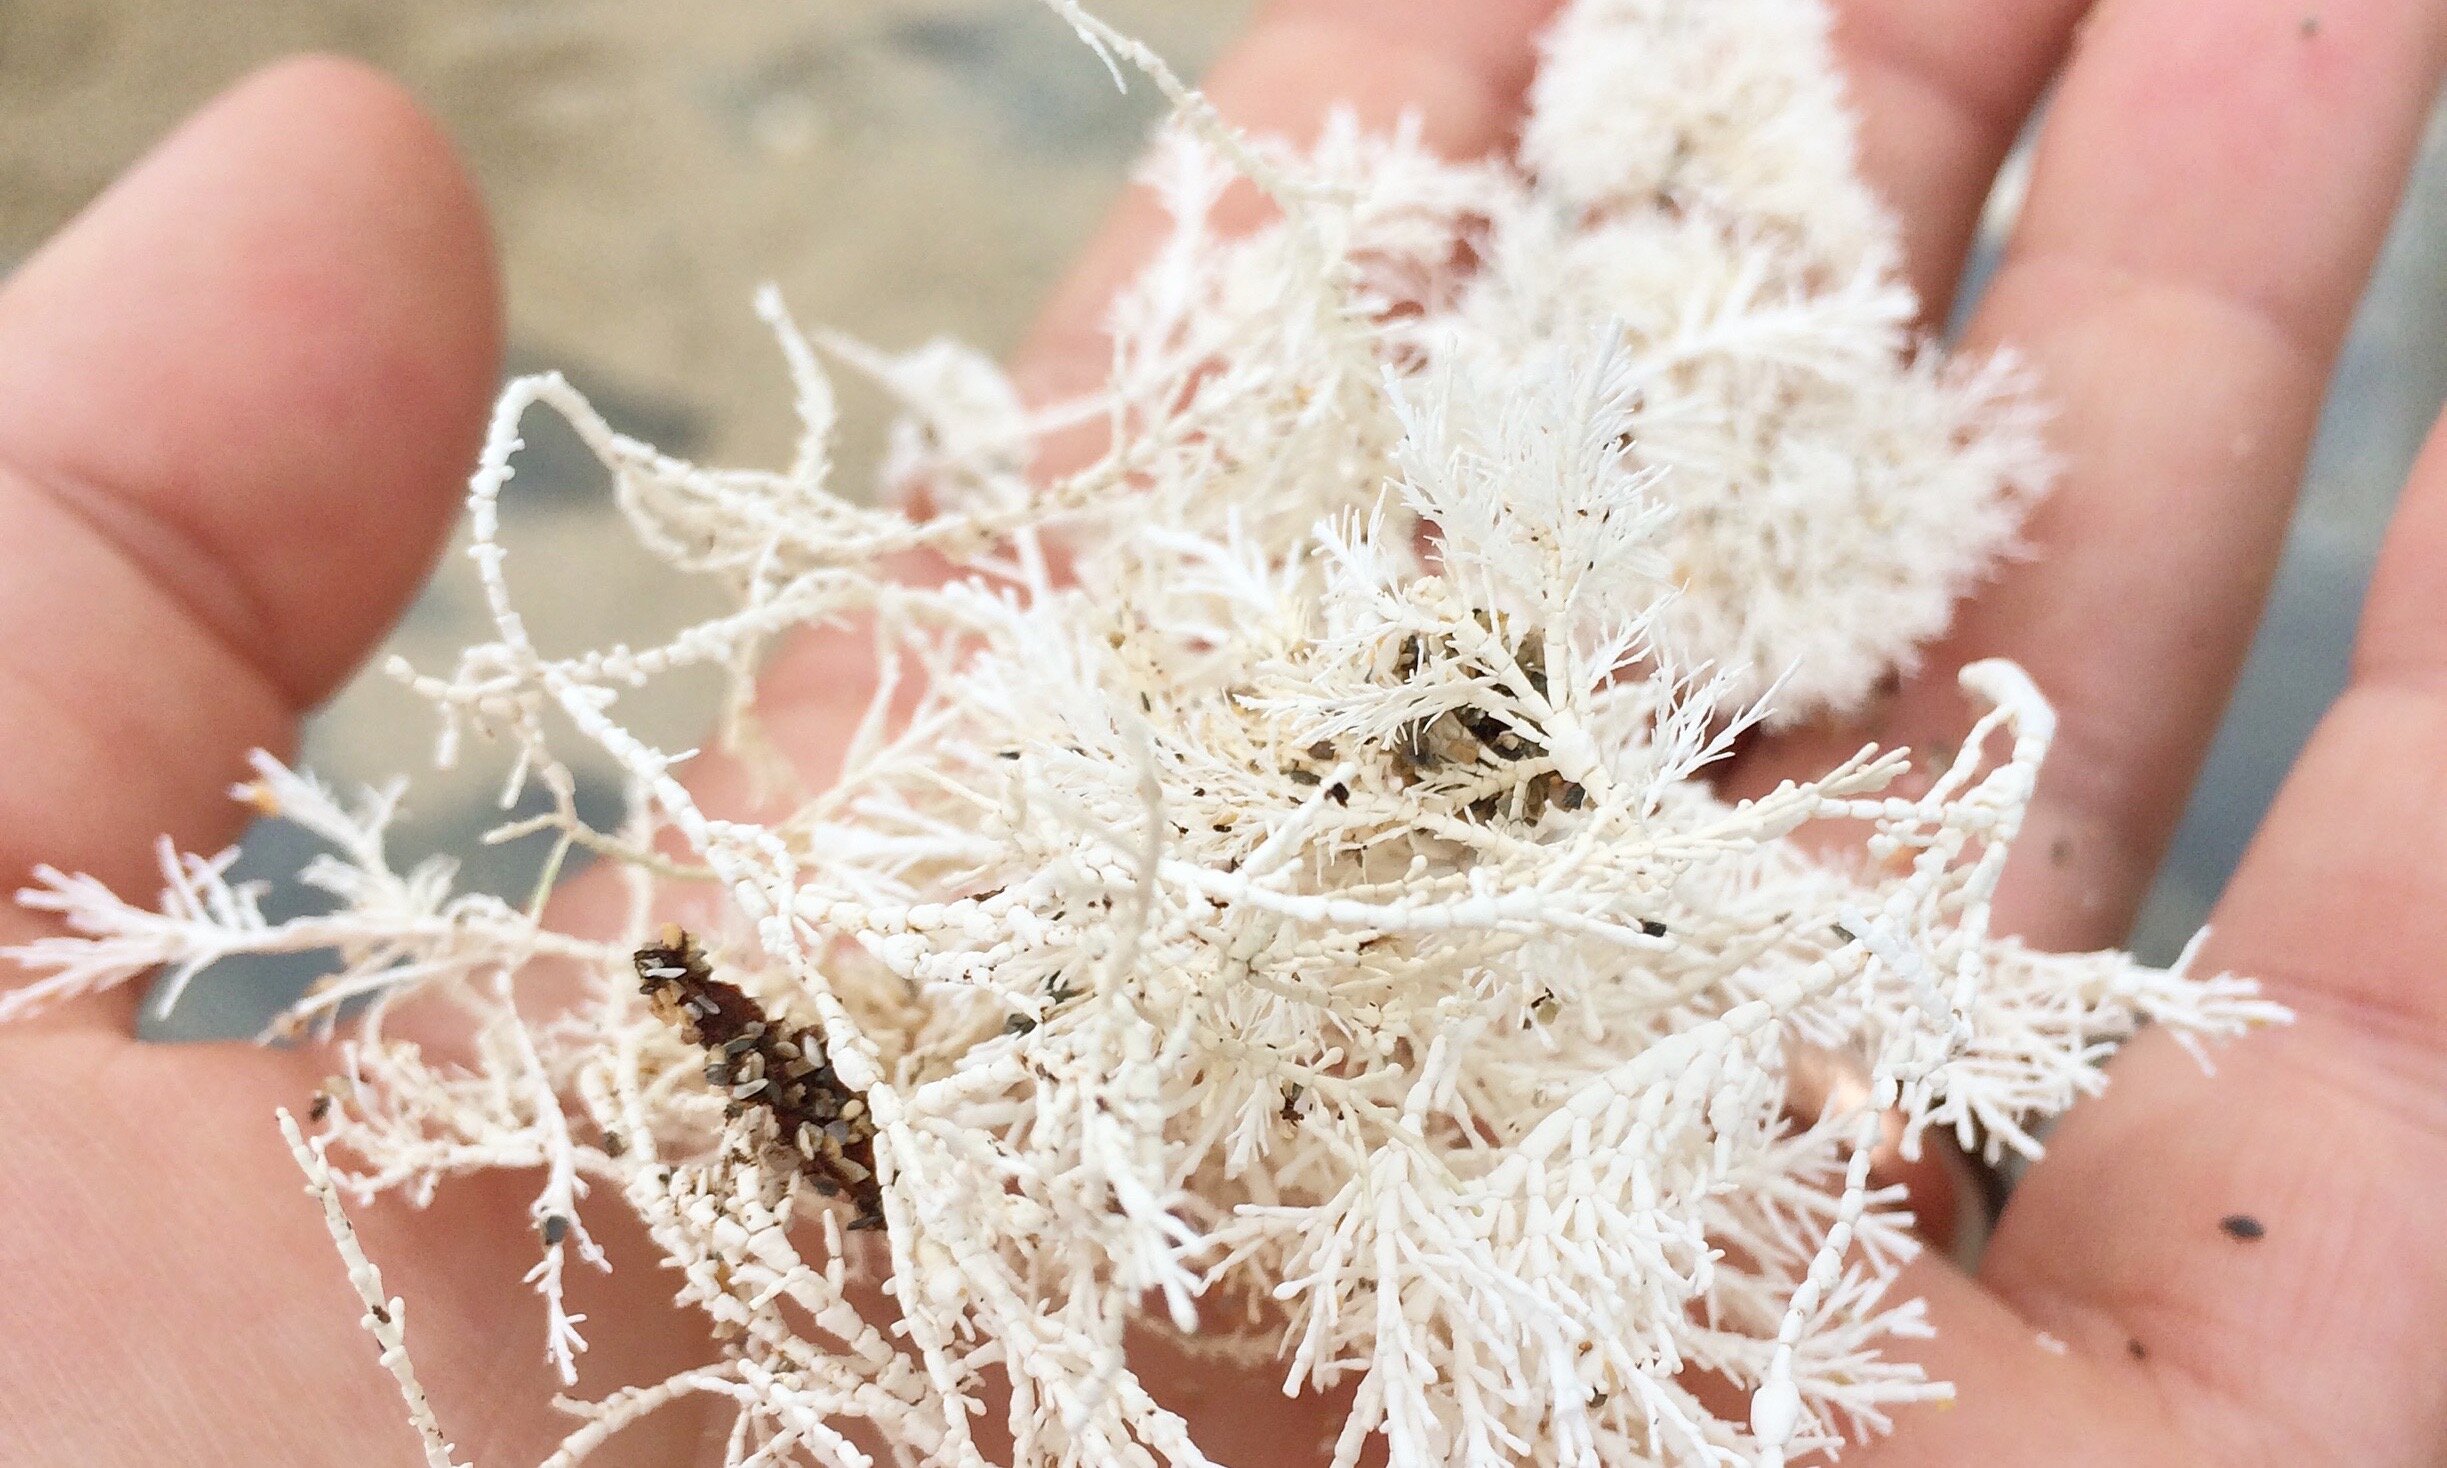 bleached cornish coral on Flushing beach is a source of inspiration for my jewellery inspired by nature